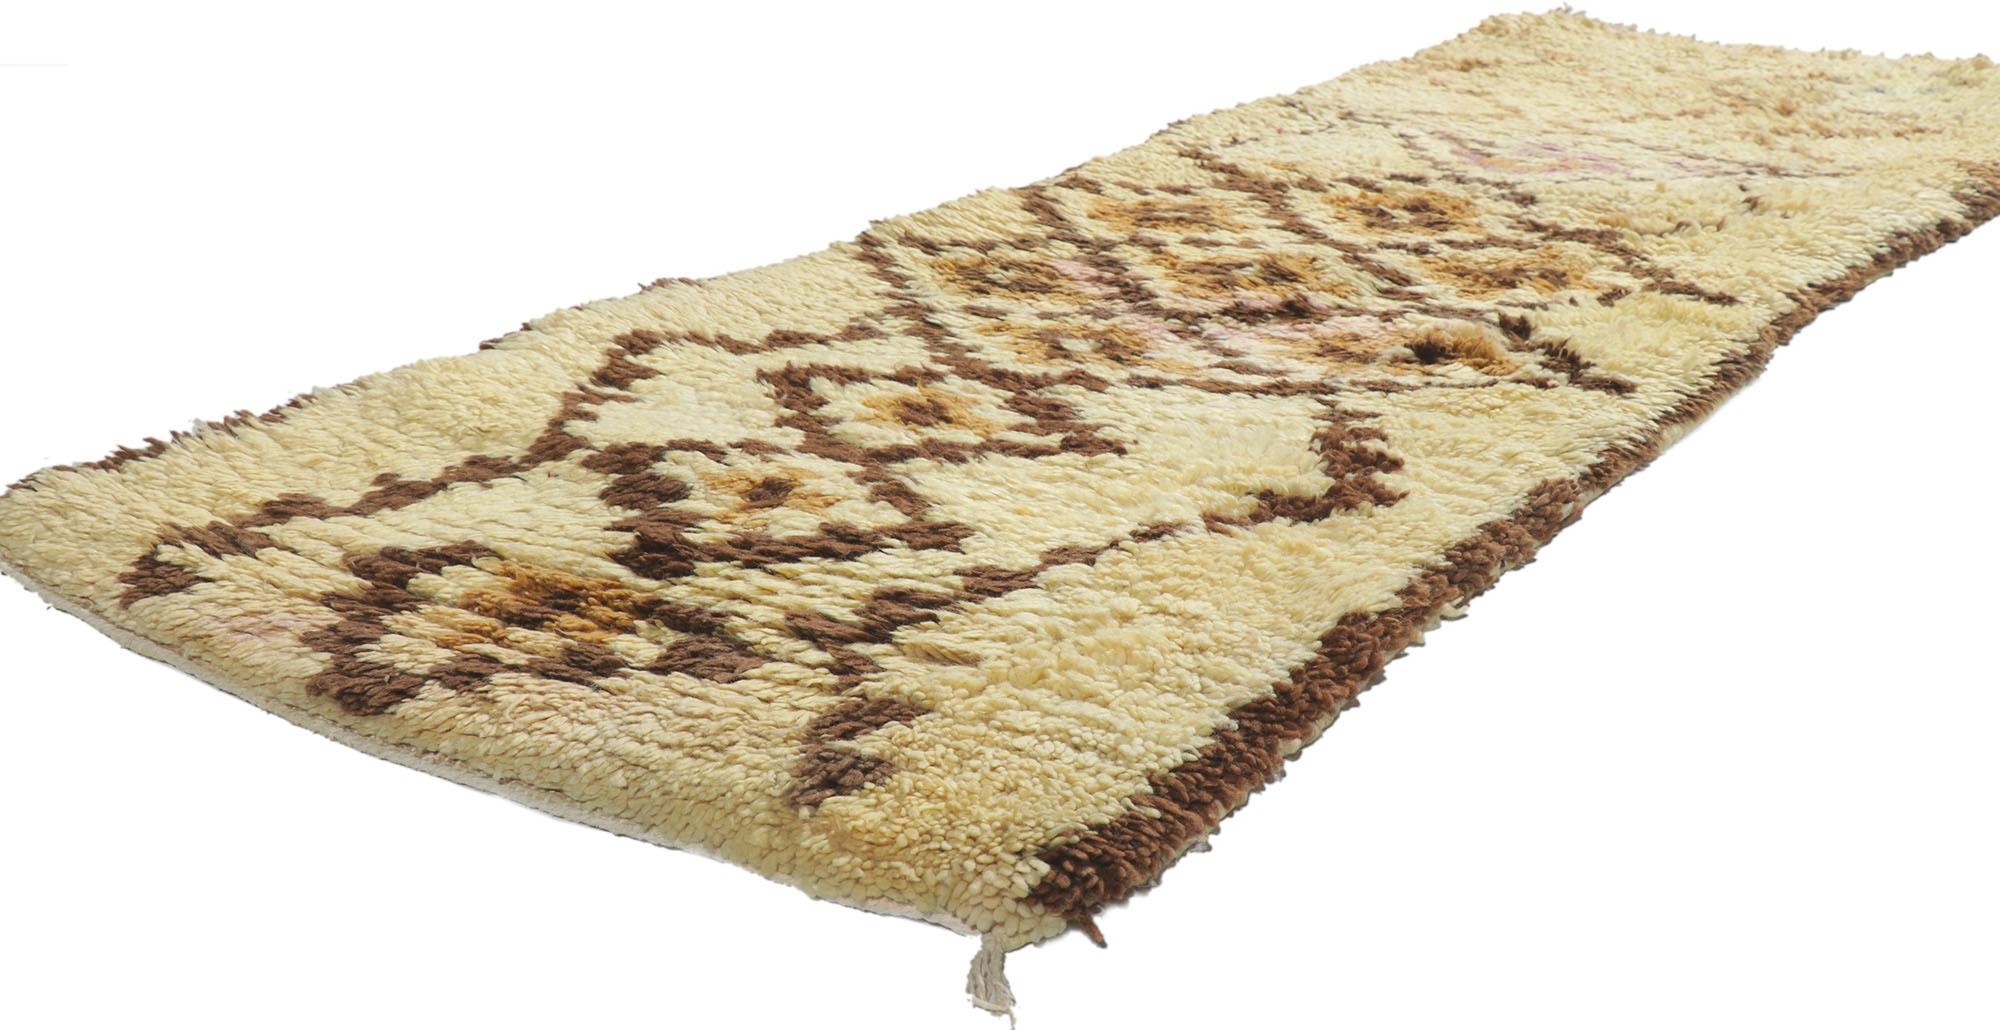 21611 Vintage Berber Moroccan Azilal Rug, 02'04 x 05'10. With its simplicity, Mid-Century Modern style, incredible detail and texture, this hand knotted wool vintage Berber Moroccan Azilal rug is a captivating vision of woven beauty. The abrashed